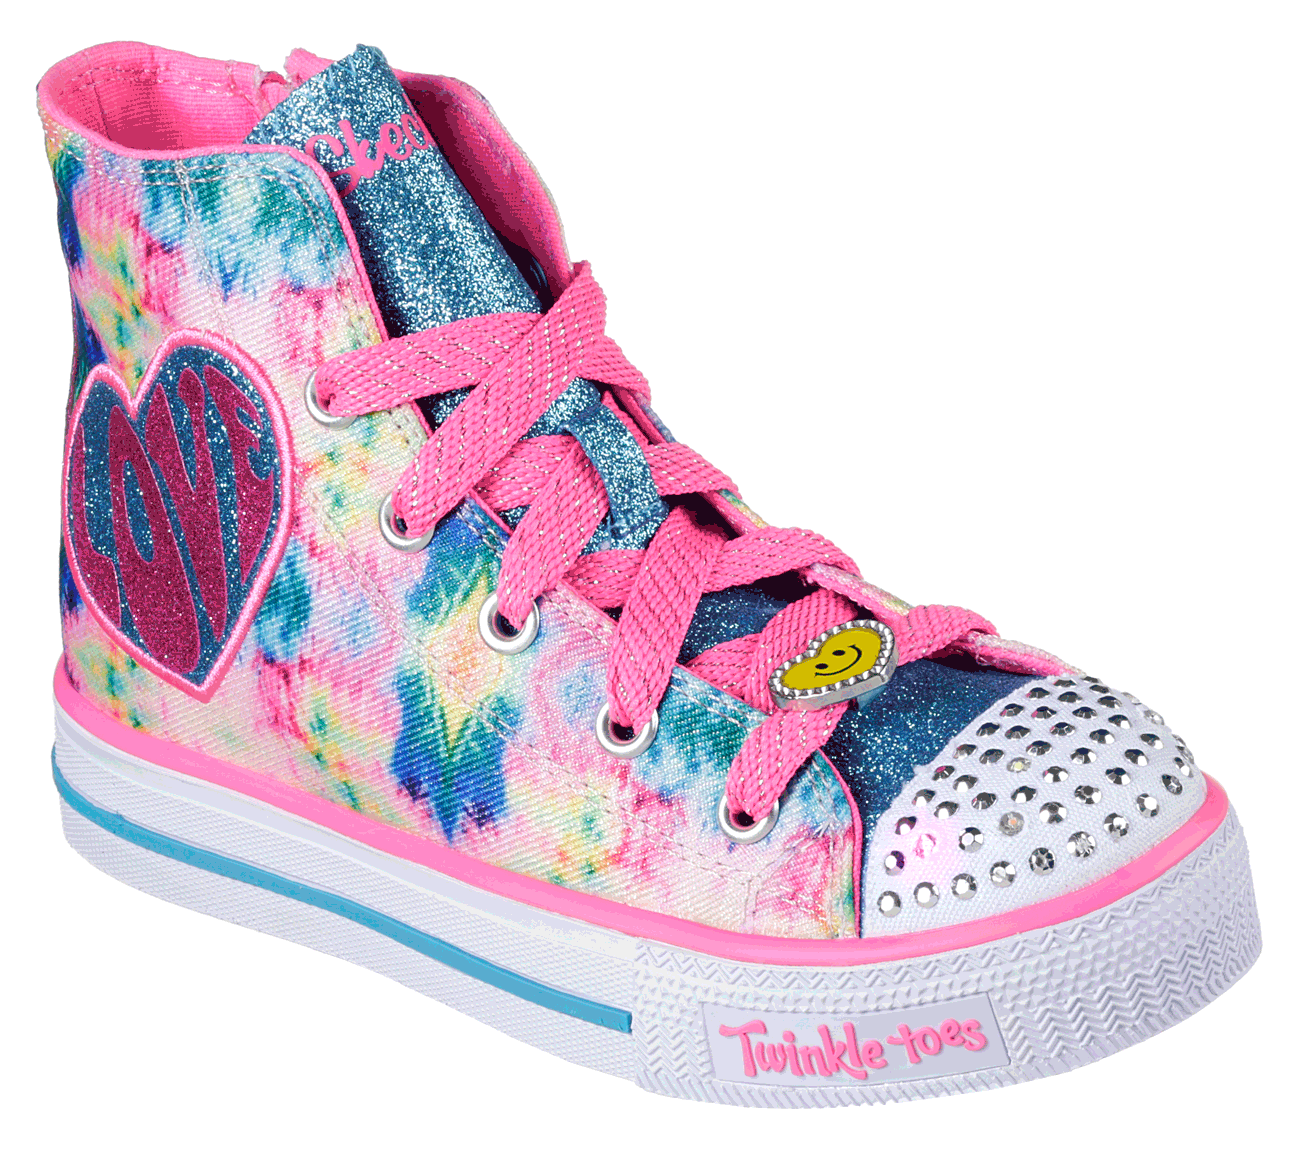 Buy SKECHERS Twinkle Toes: Shuffles - Sparkle Smiles Twinkle Toes Shoes